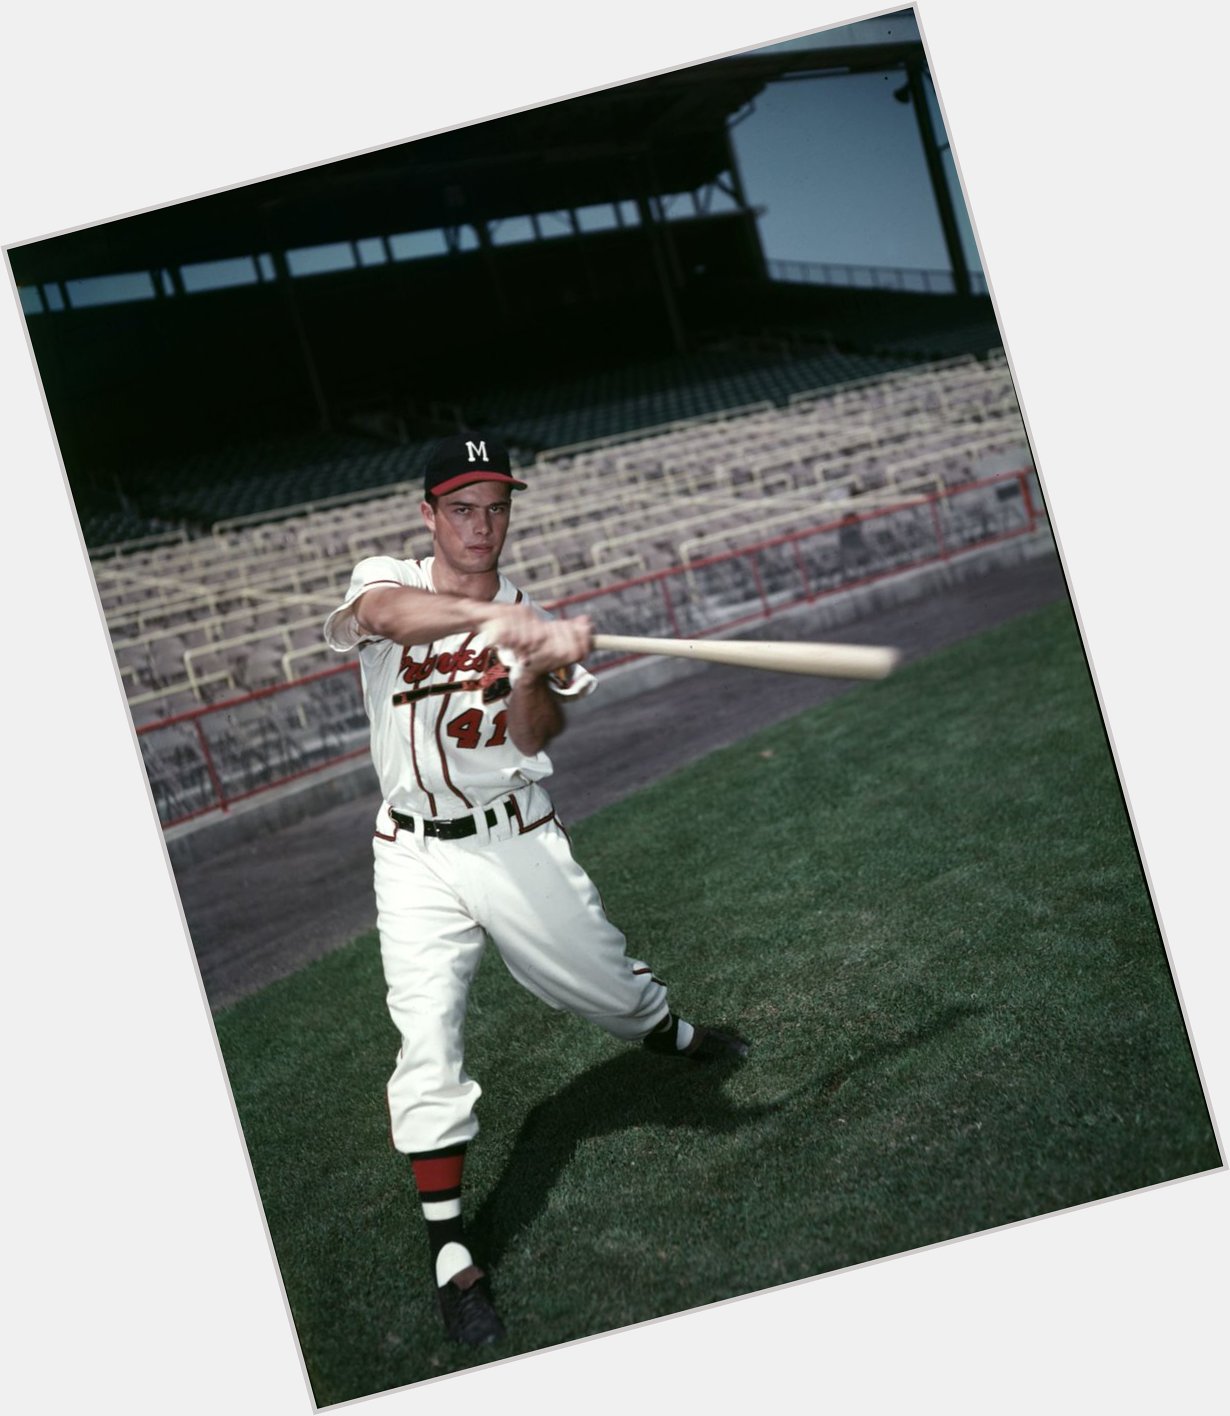 Happy Birthday to Eddie Mathews, who would have turned 86 today! 